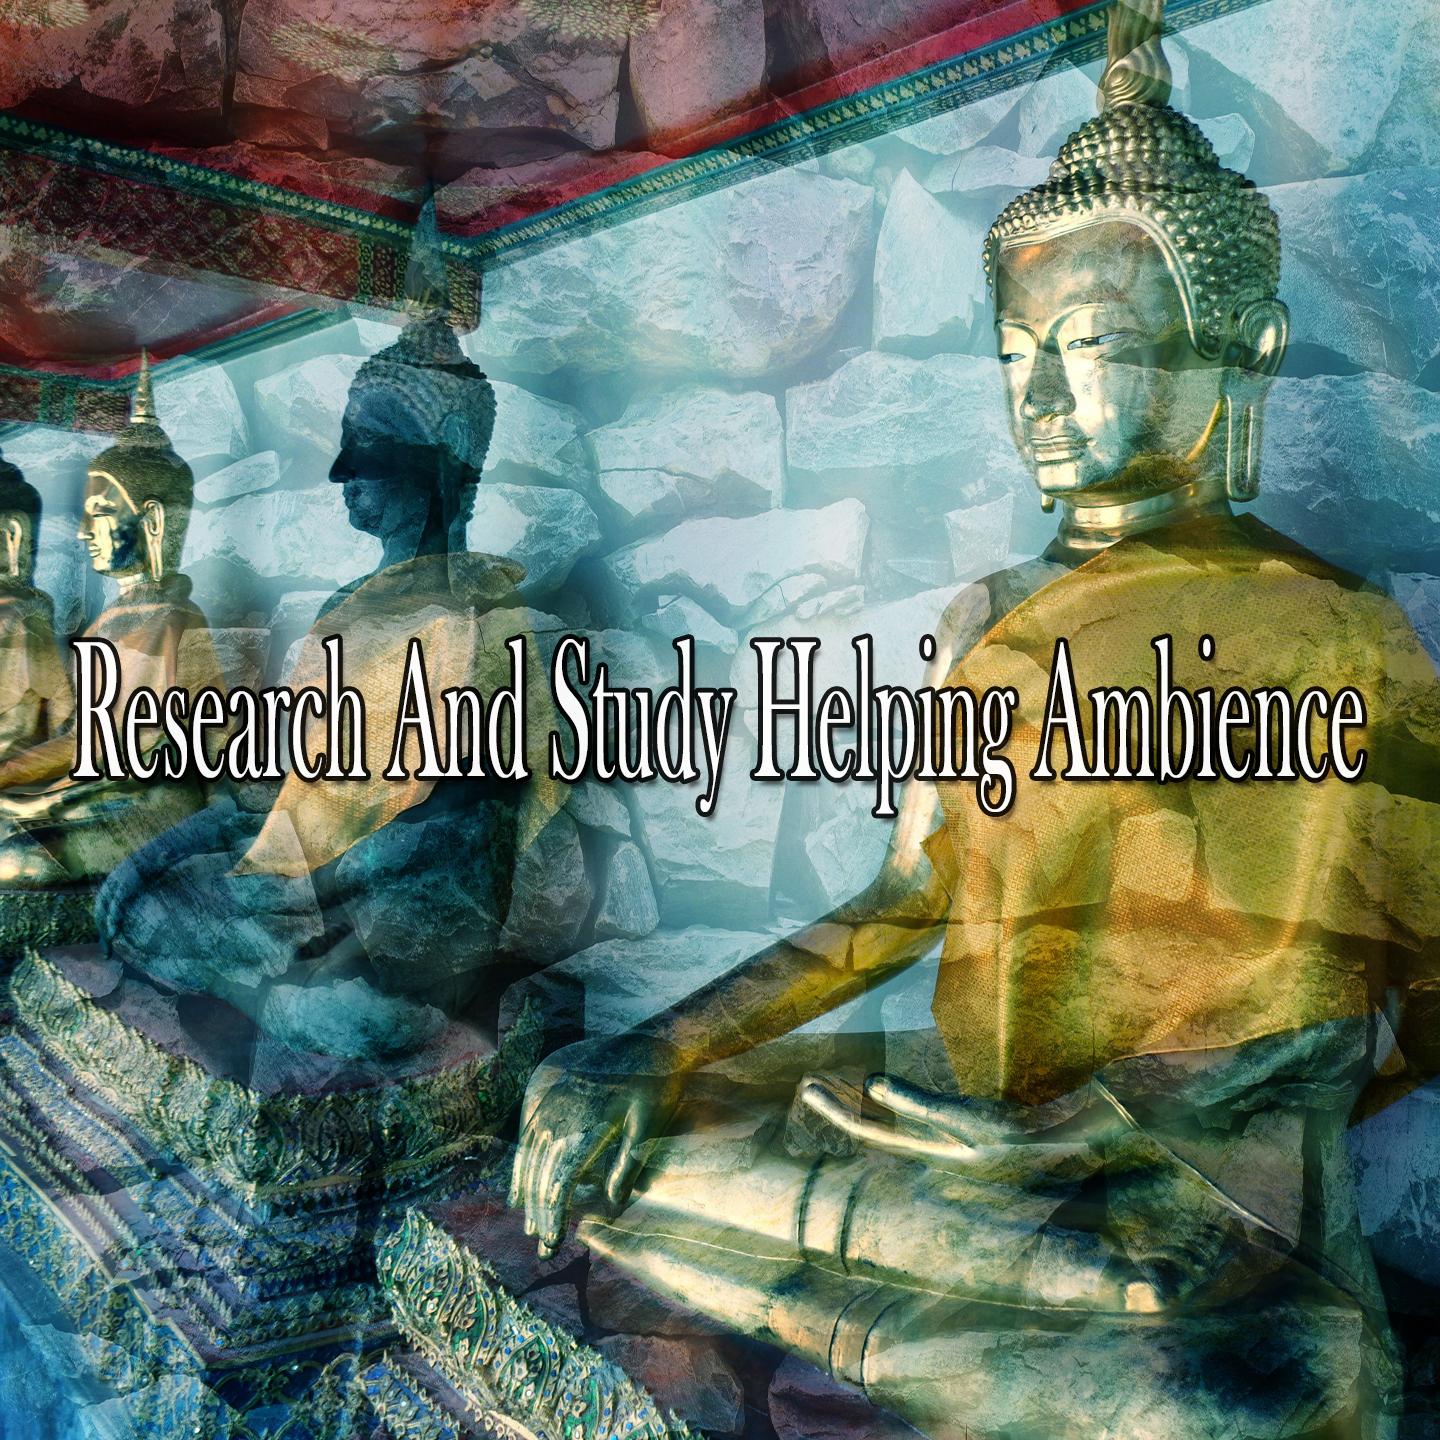 Research And Study Helping Ambience